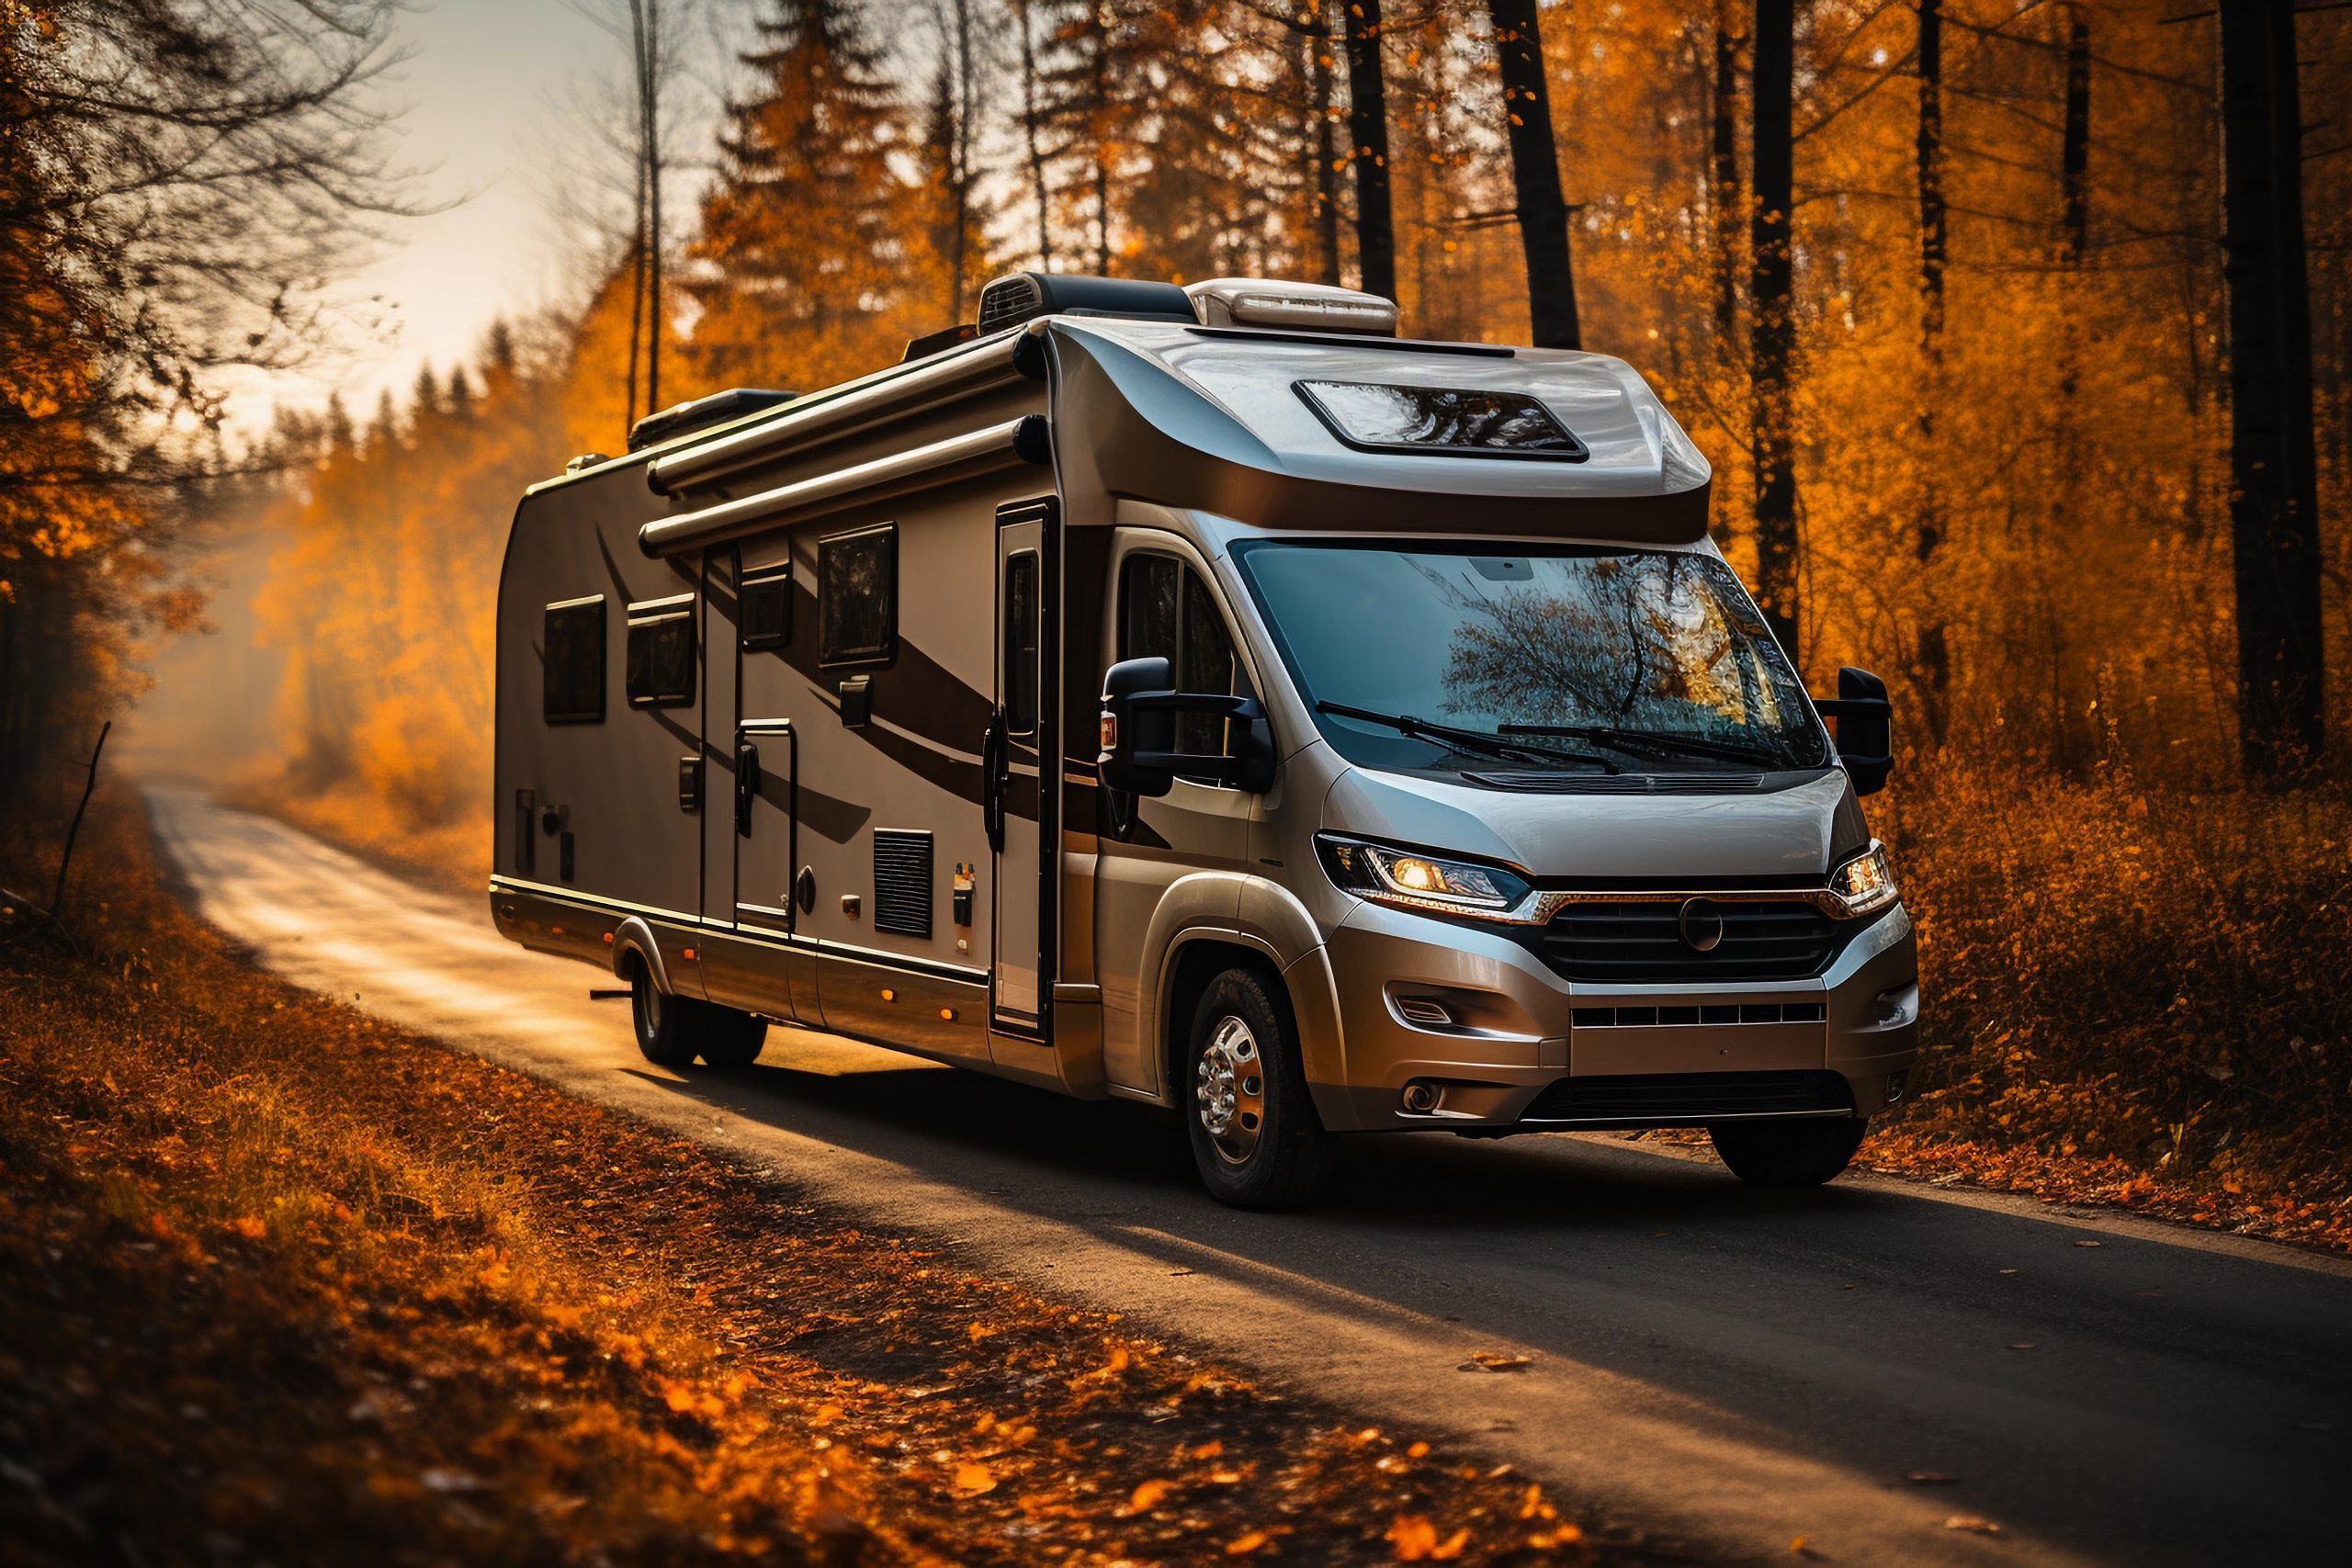 The Psychology Behind Minimalist Living in an RV